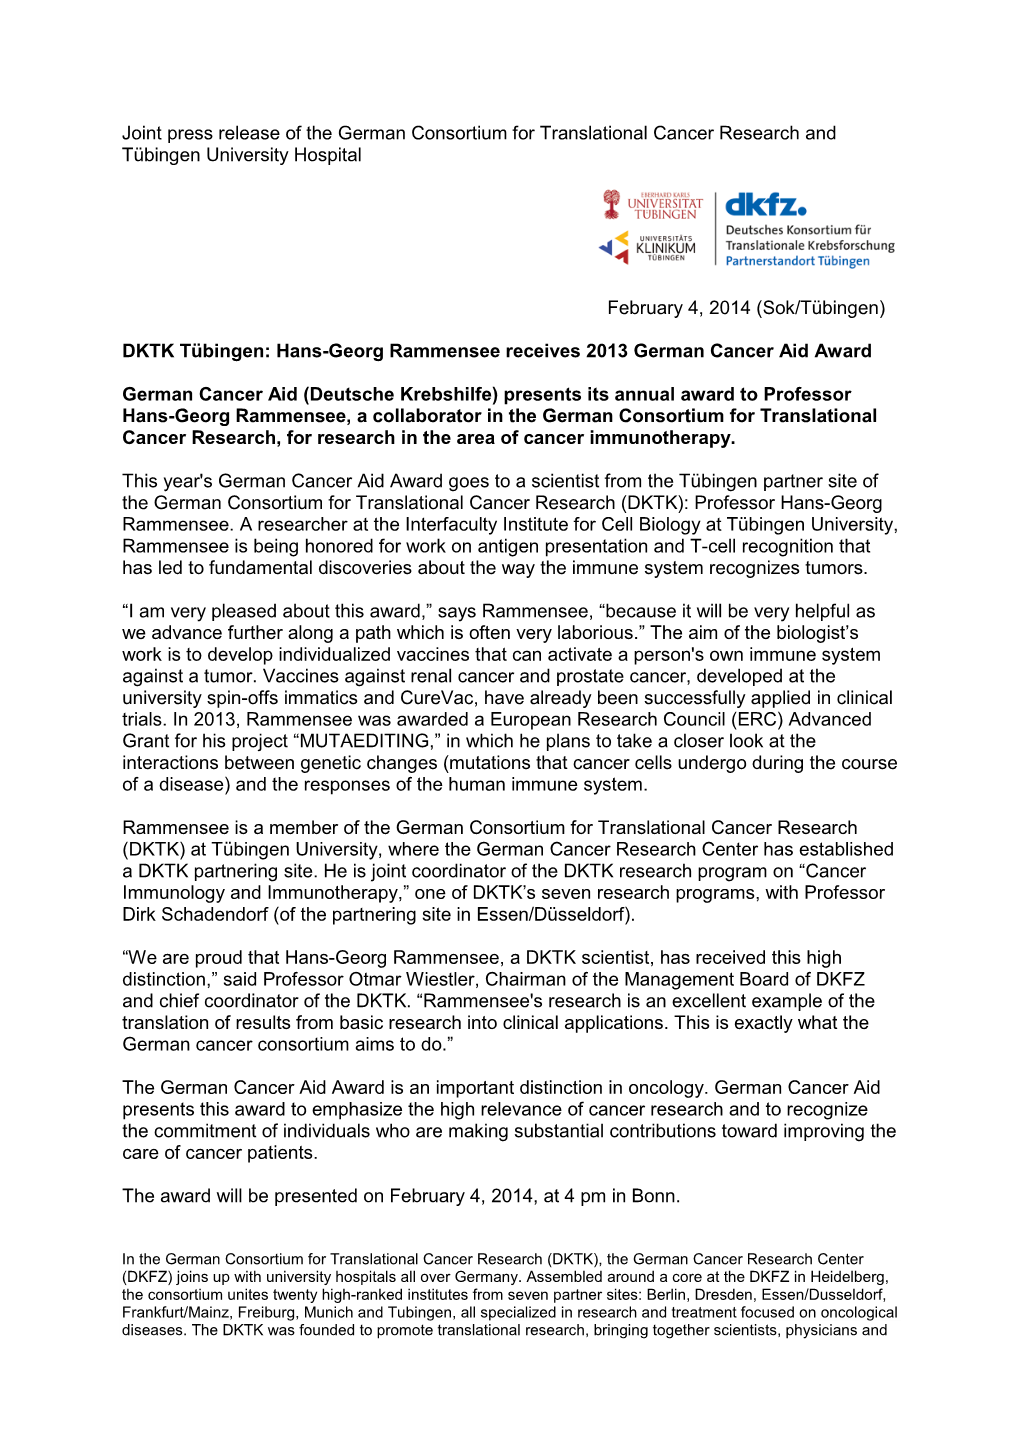 Joint Press Release of the German Consortium for Translational Cancer Research and Tübingen University Hospital